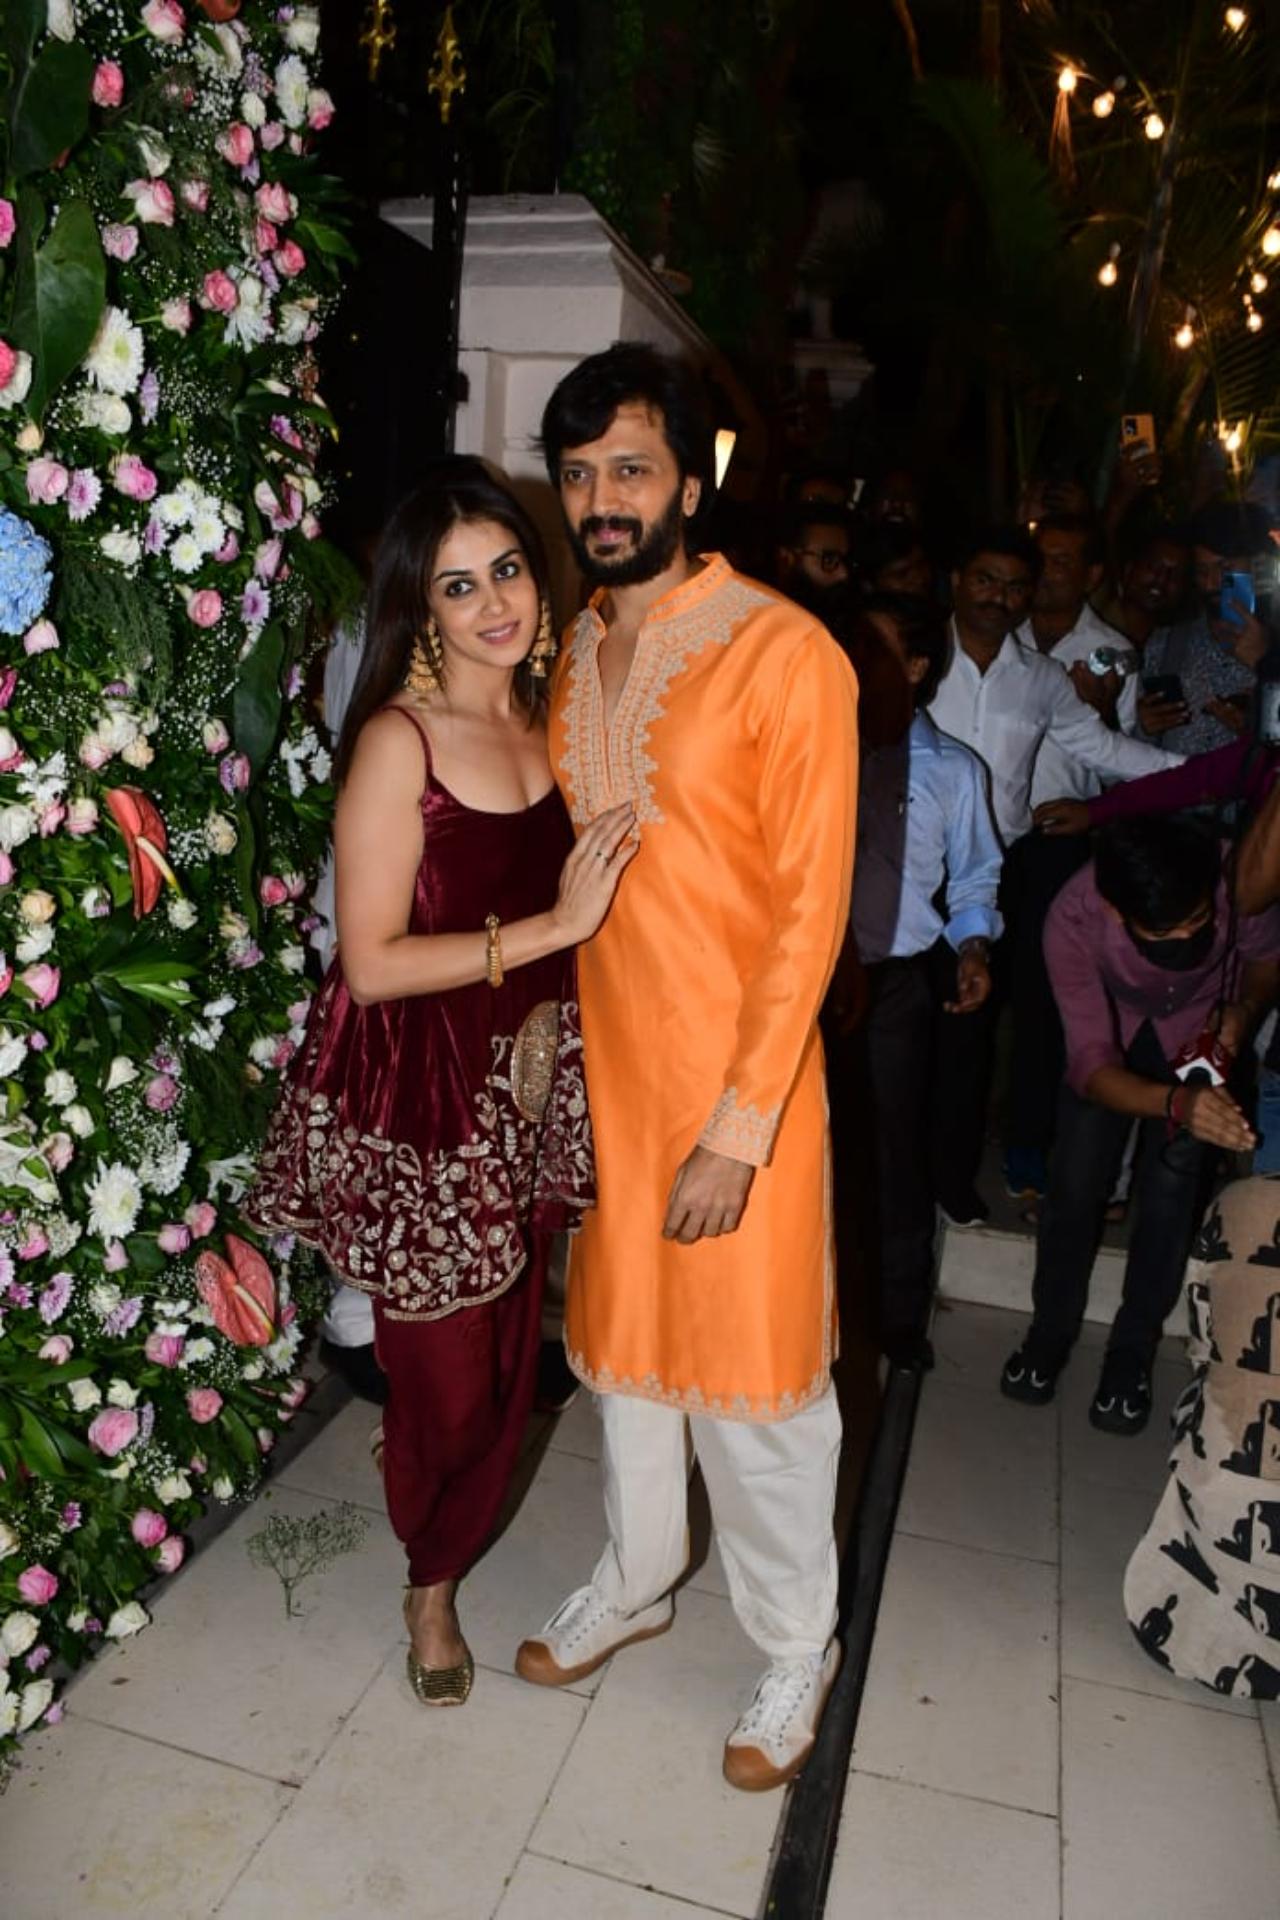 Riteish and Genelia Deshmukh who have been seen at almost all the Diwali parties so far were also seen at Ekta's party. While Riteish went for an orange kurta, Genelia opted for a maroon kurta